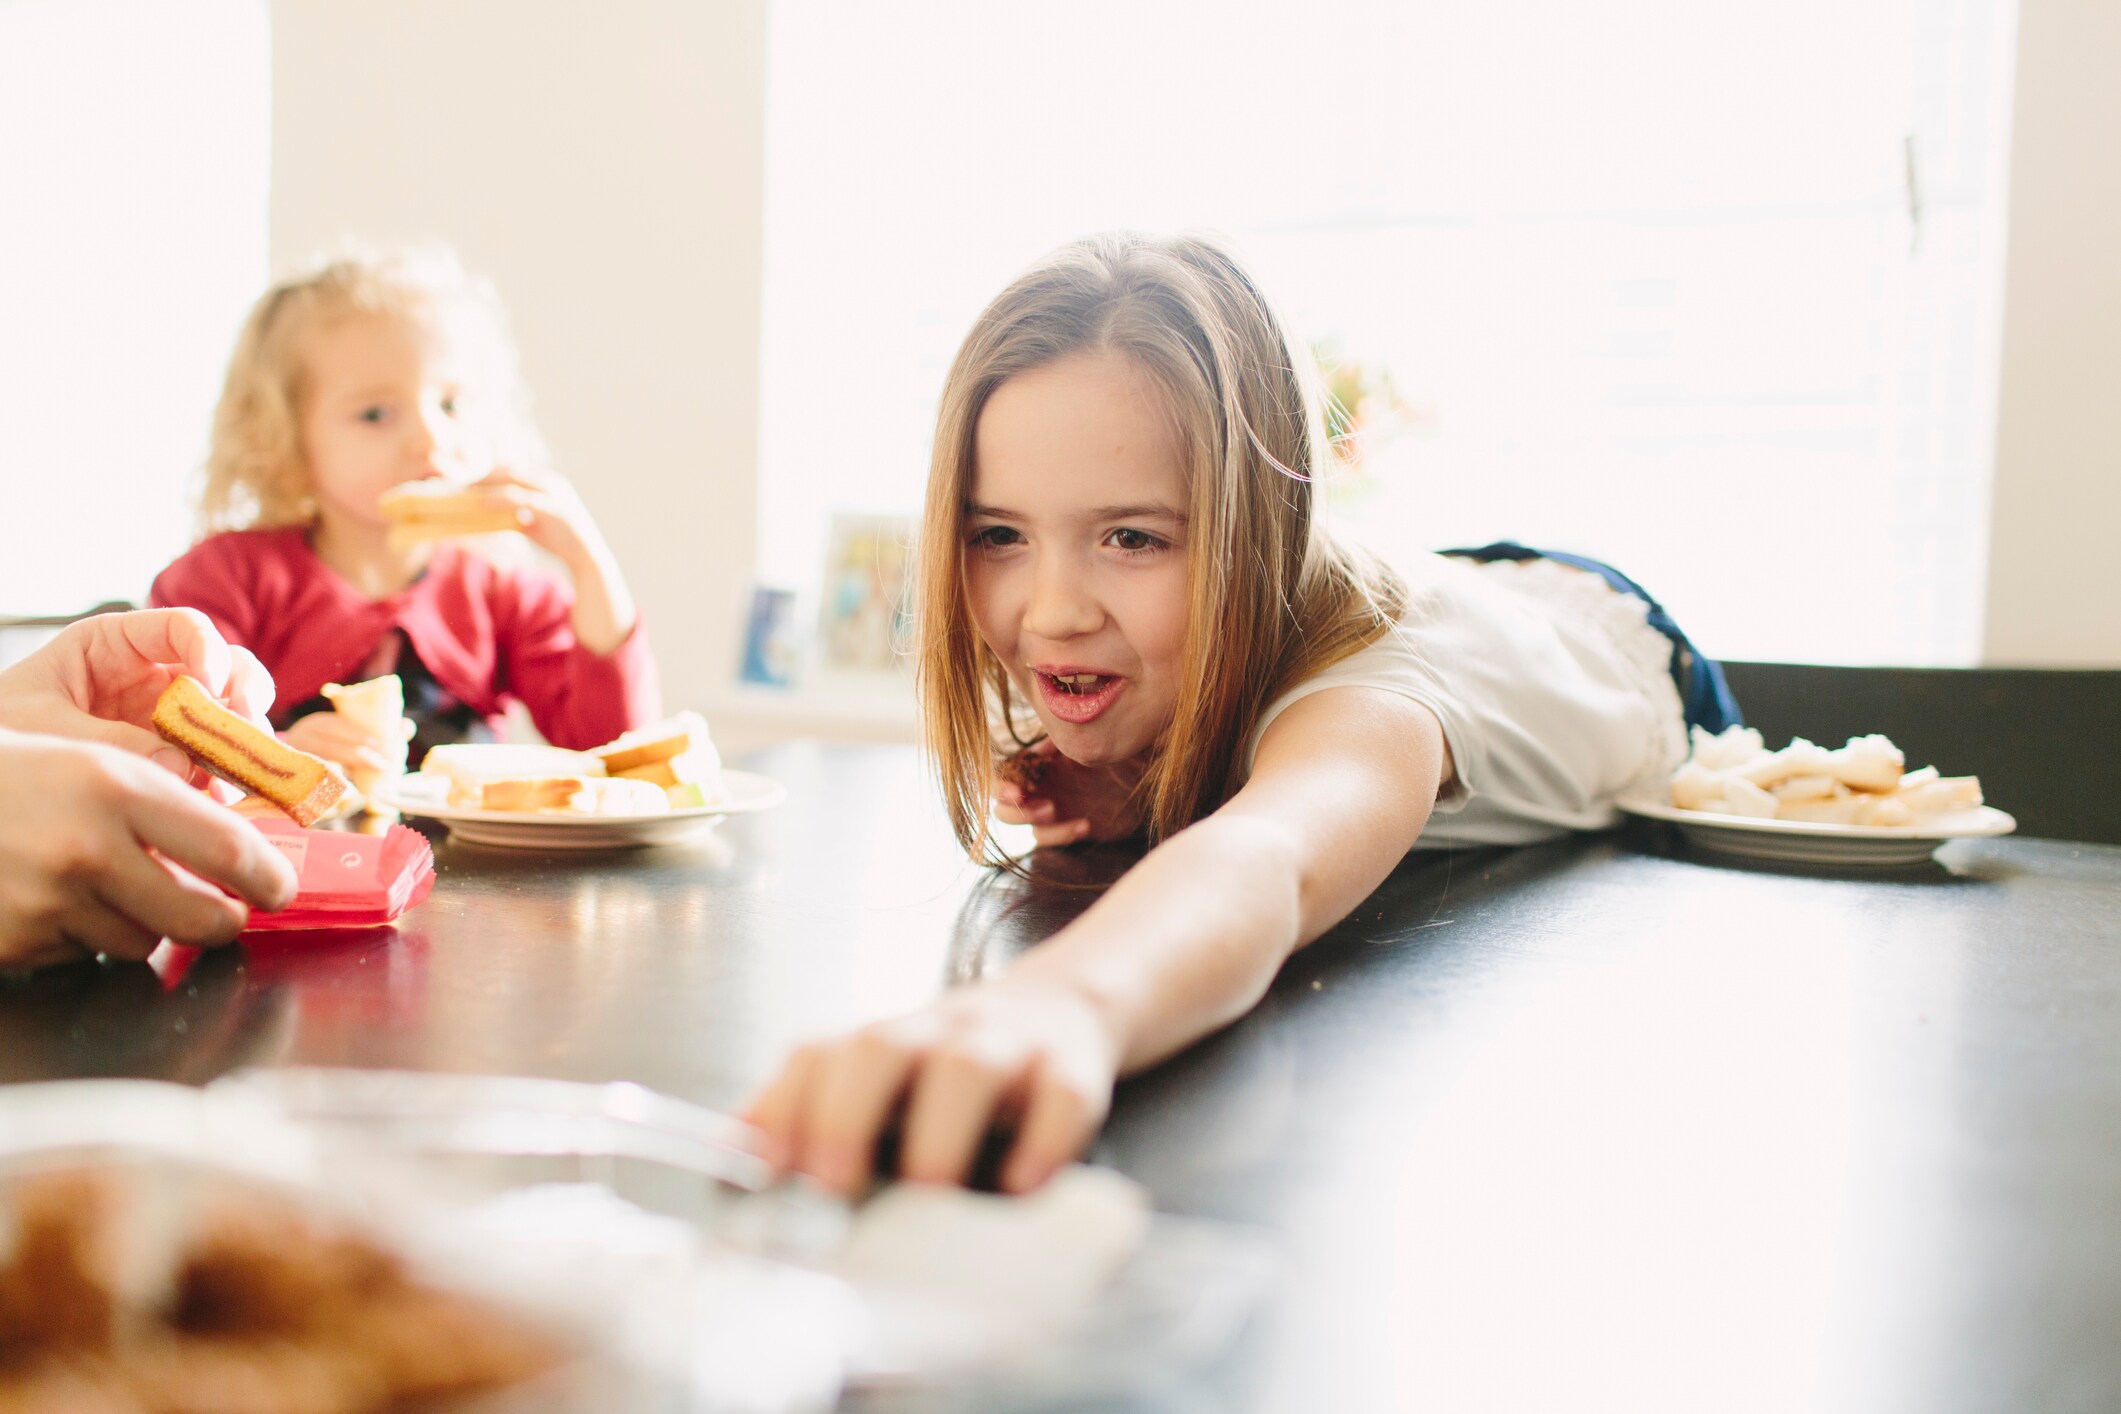 Food allergies 101: A guide for parents and caregivers